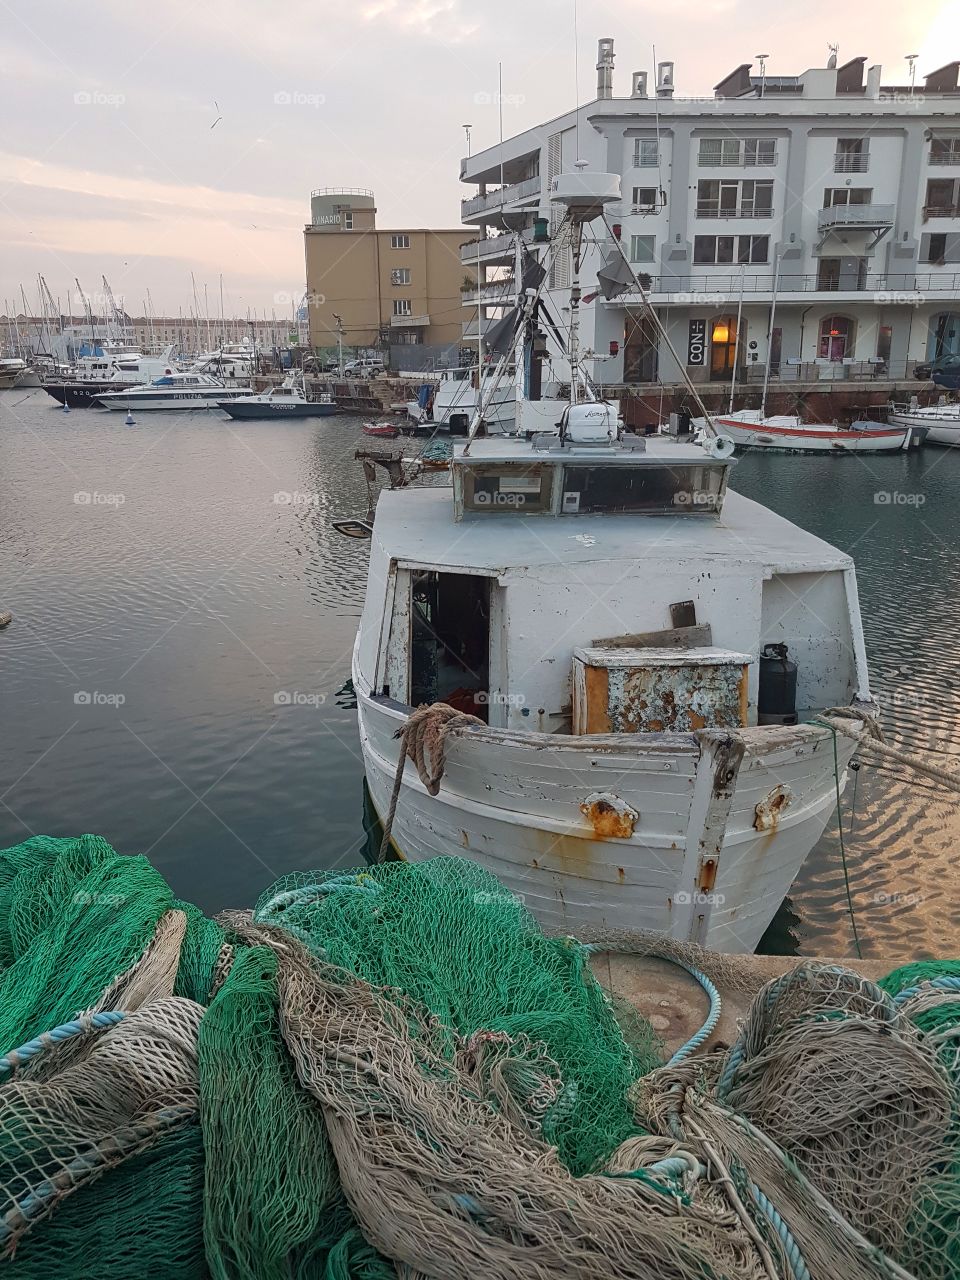 Boats and fish nets in the port of Genoa city at sunset